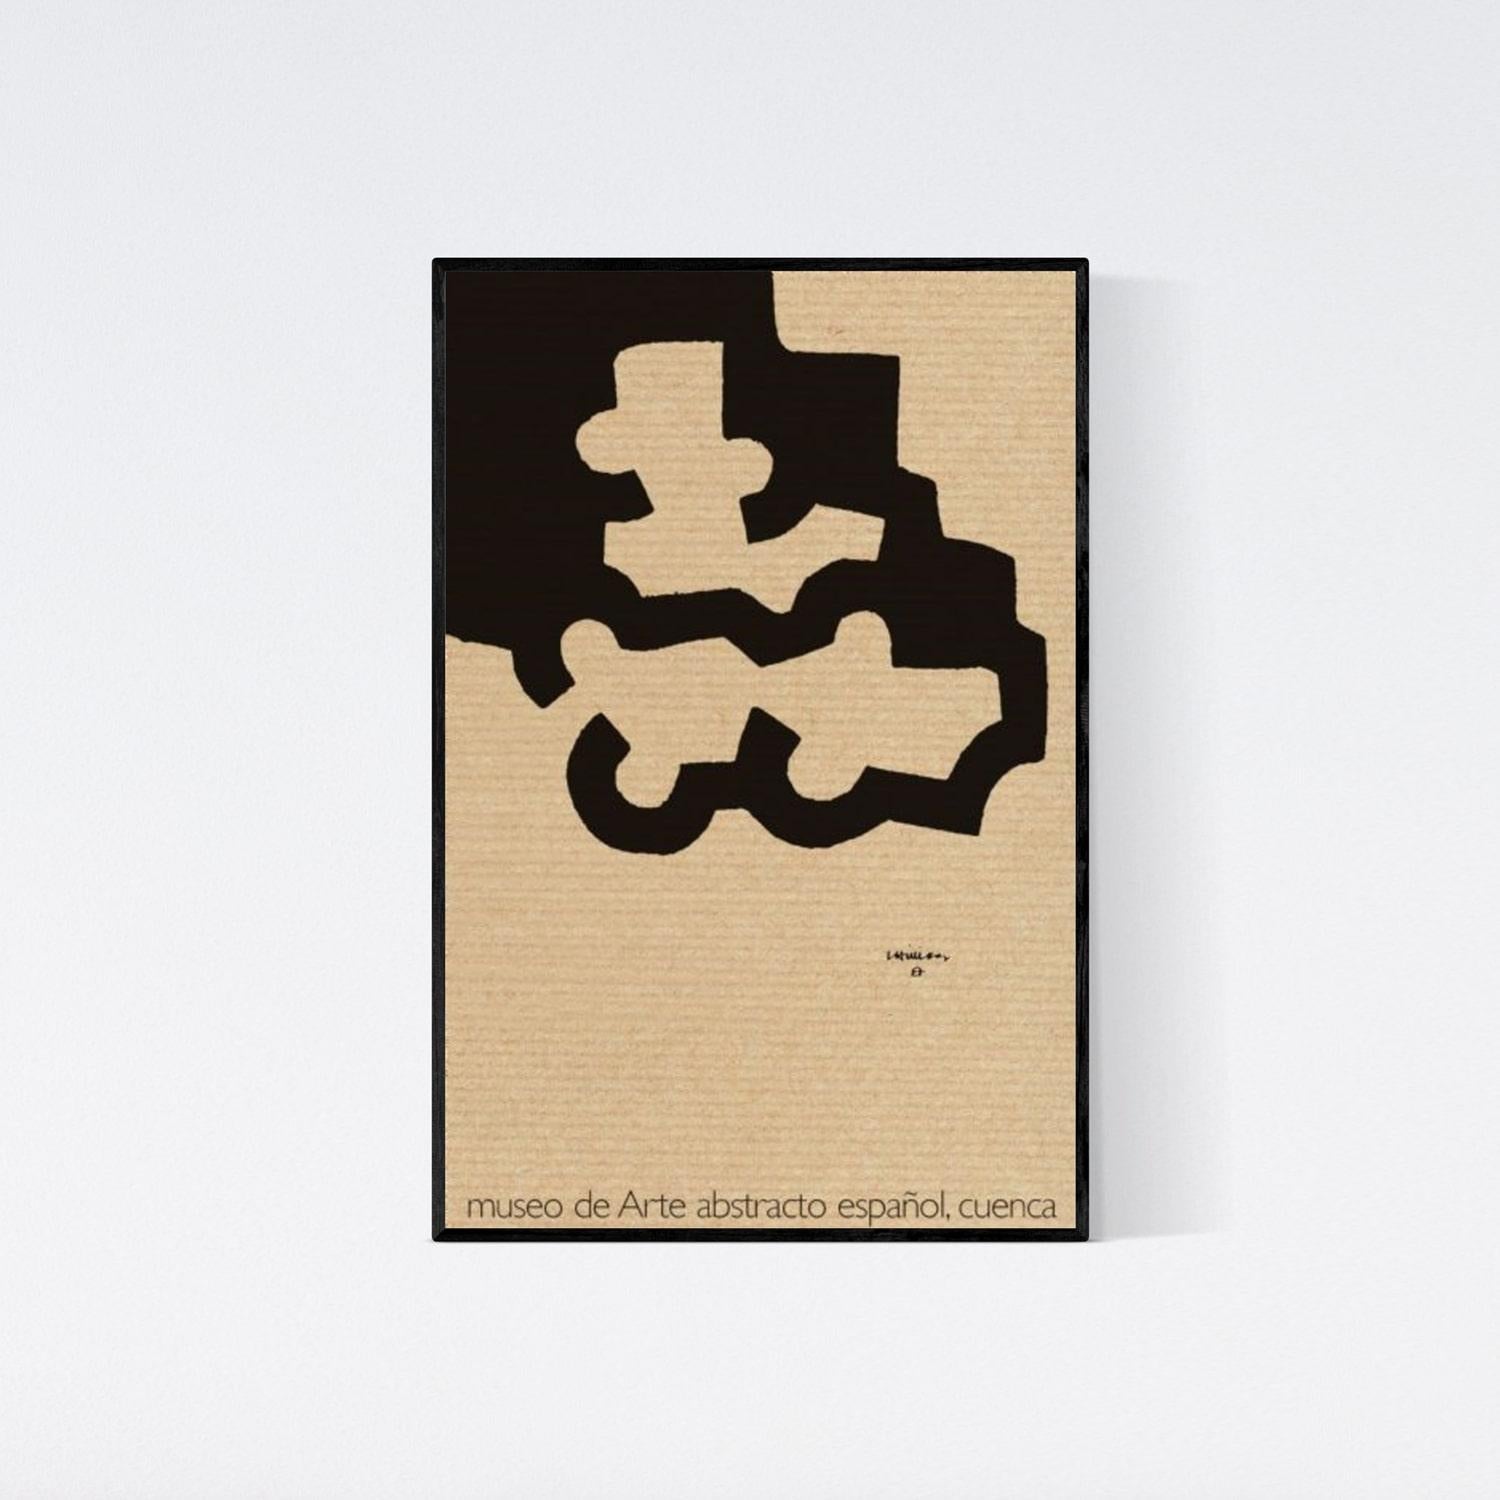 Lithography Exhibition Poster Vintage Black Brown Minimal Geometric - Abstract Geometric Print by Eduardo Chillida